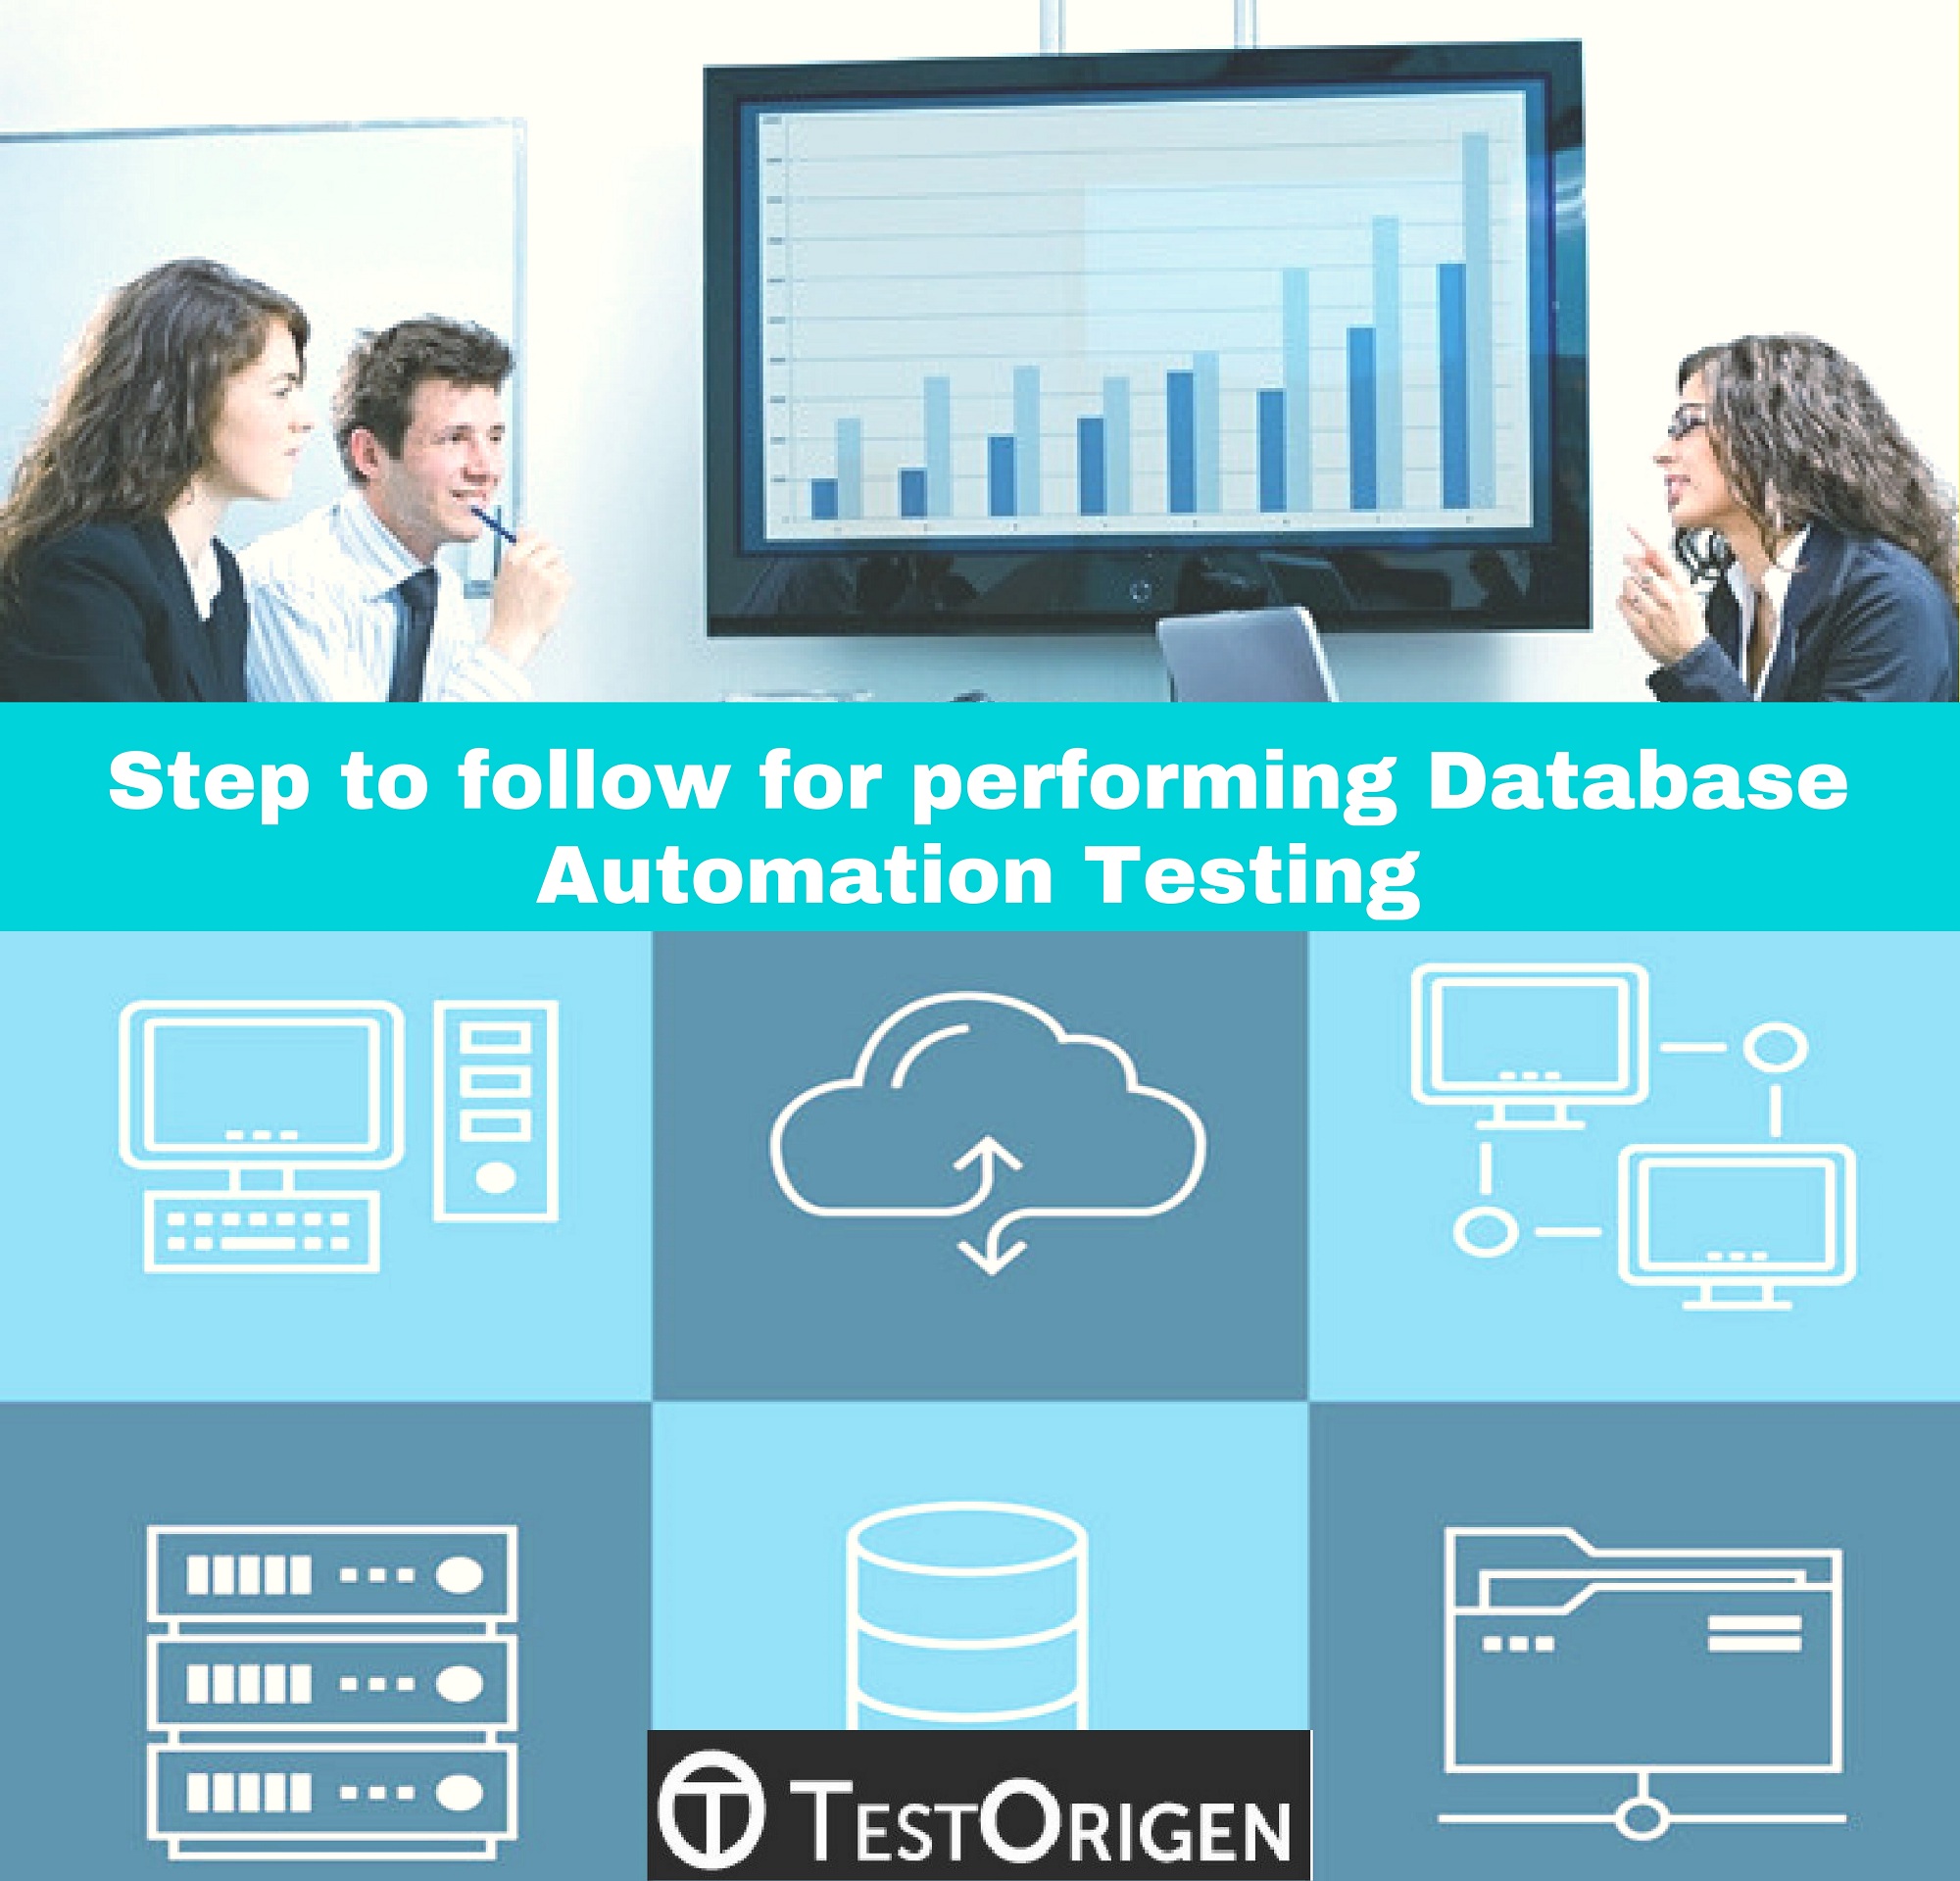 Step to follow for performing Database Automation Testing